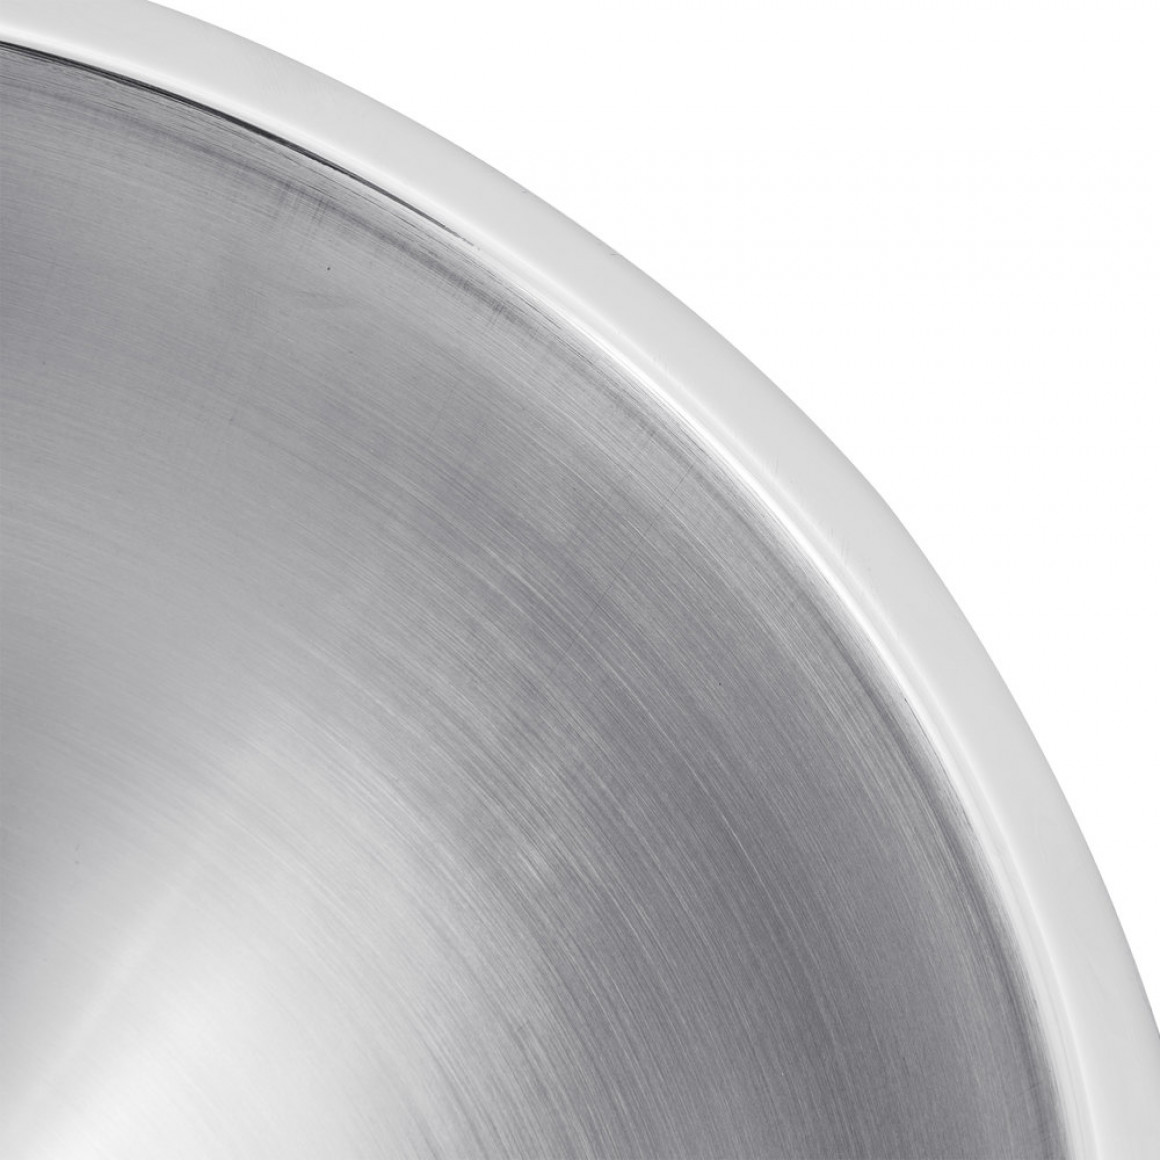 STAINLESS STEEL, SATIN BOWL, DOUBLE WALL, ANGLED, 108 OZ.